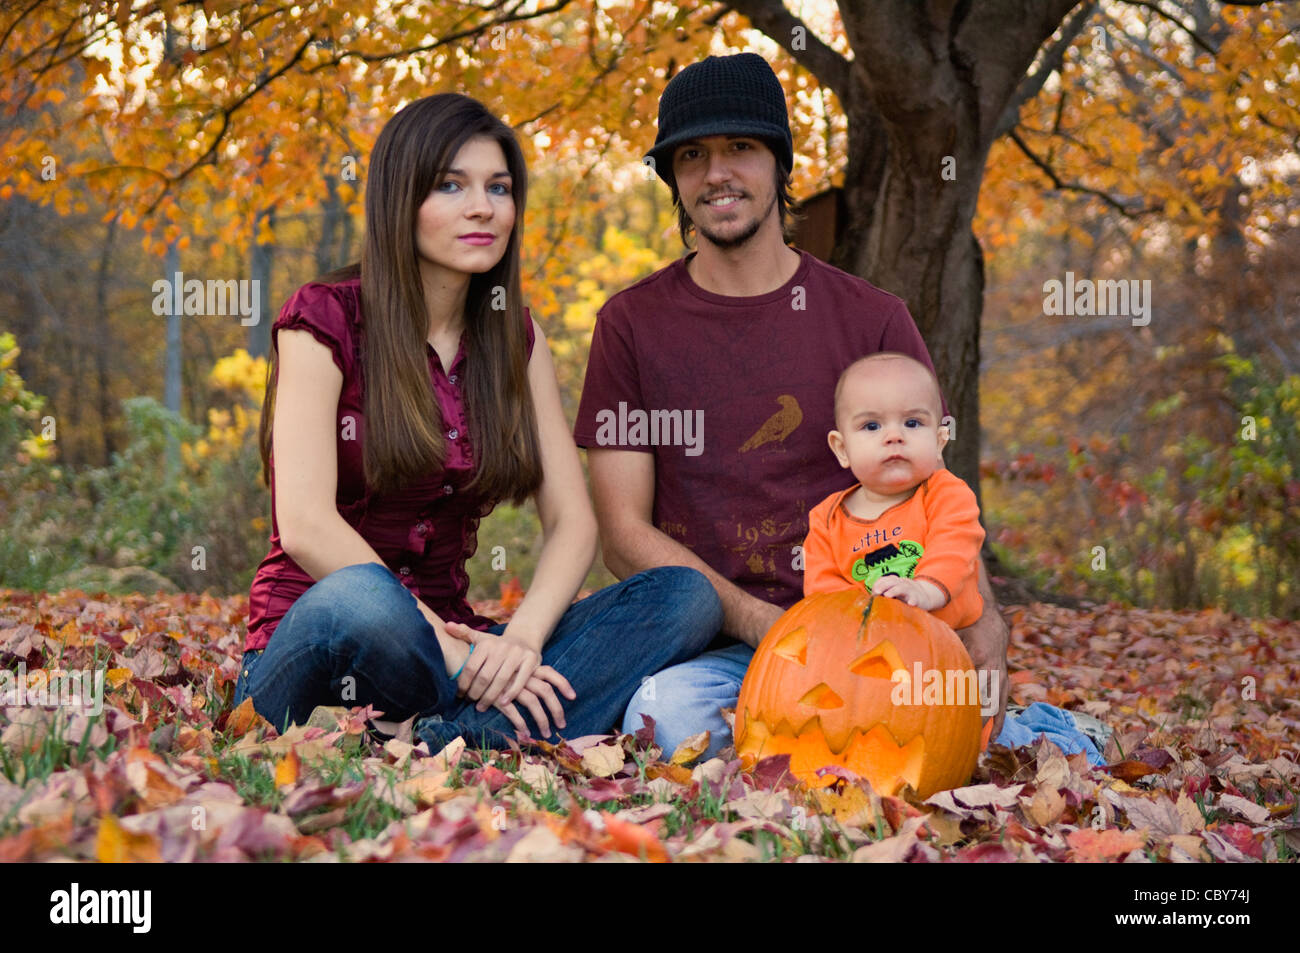 Young Family Posing With Jack-O-Lantern on Lawn Stock Photo